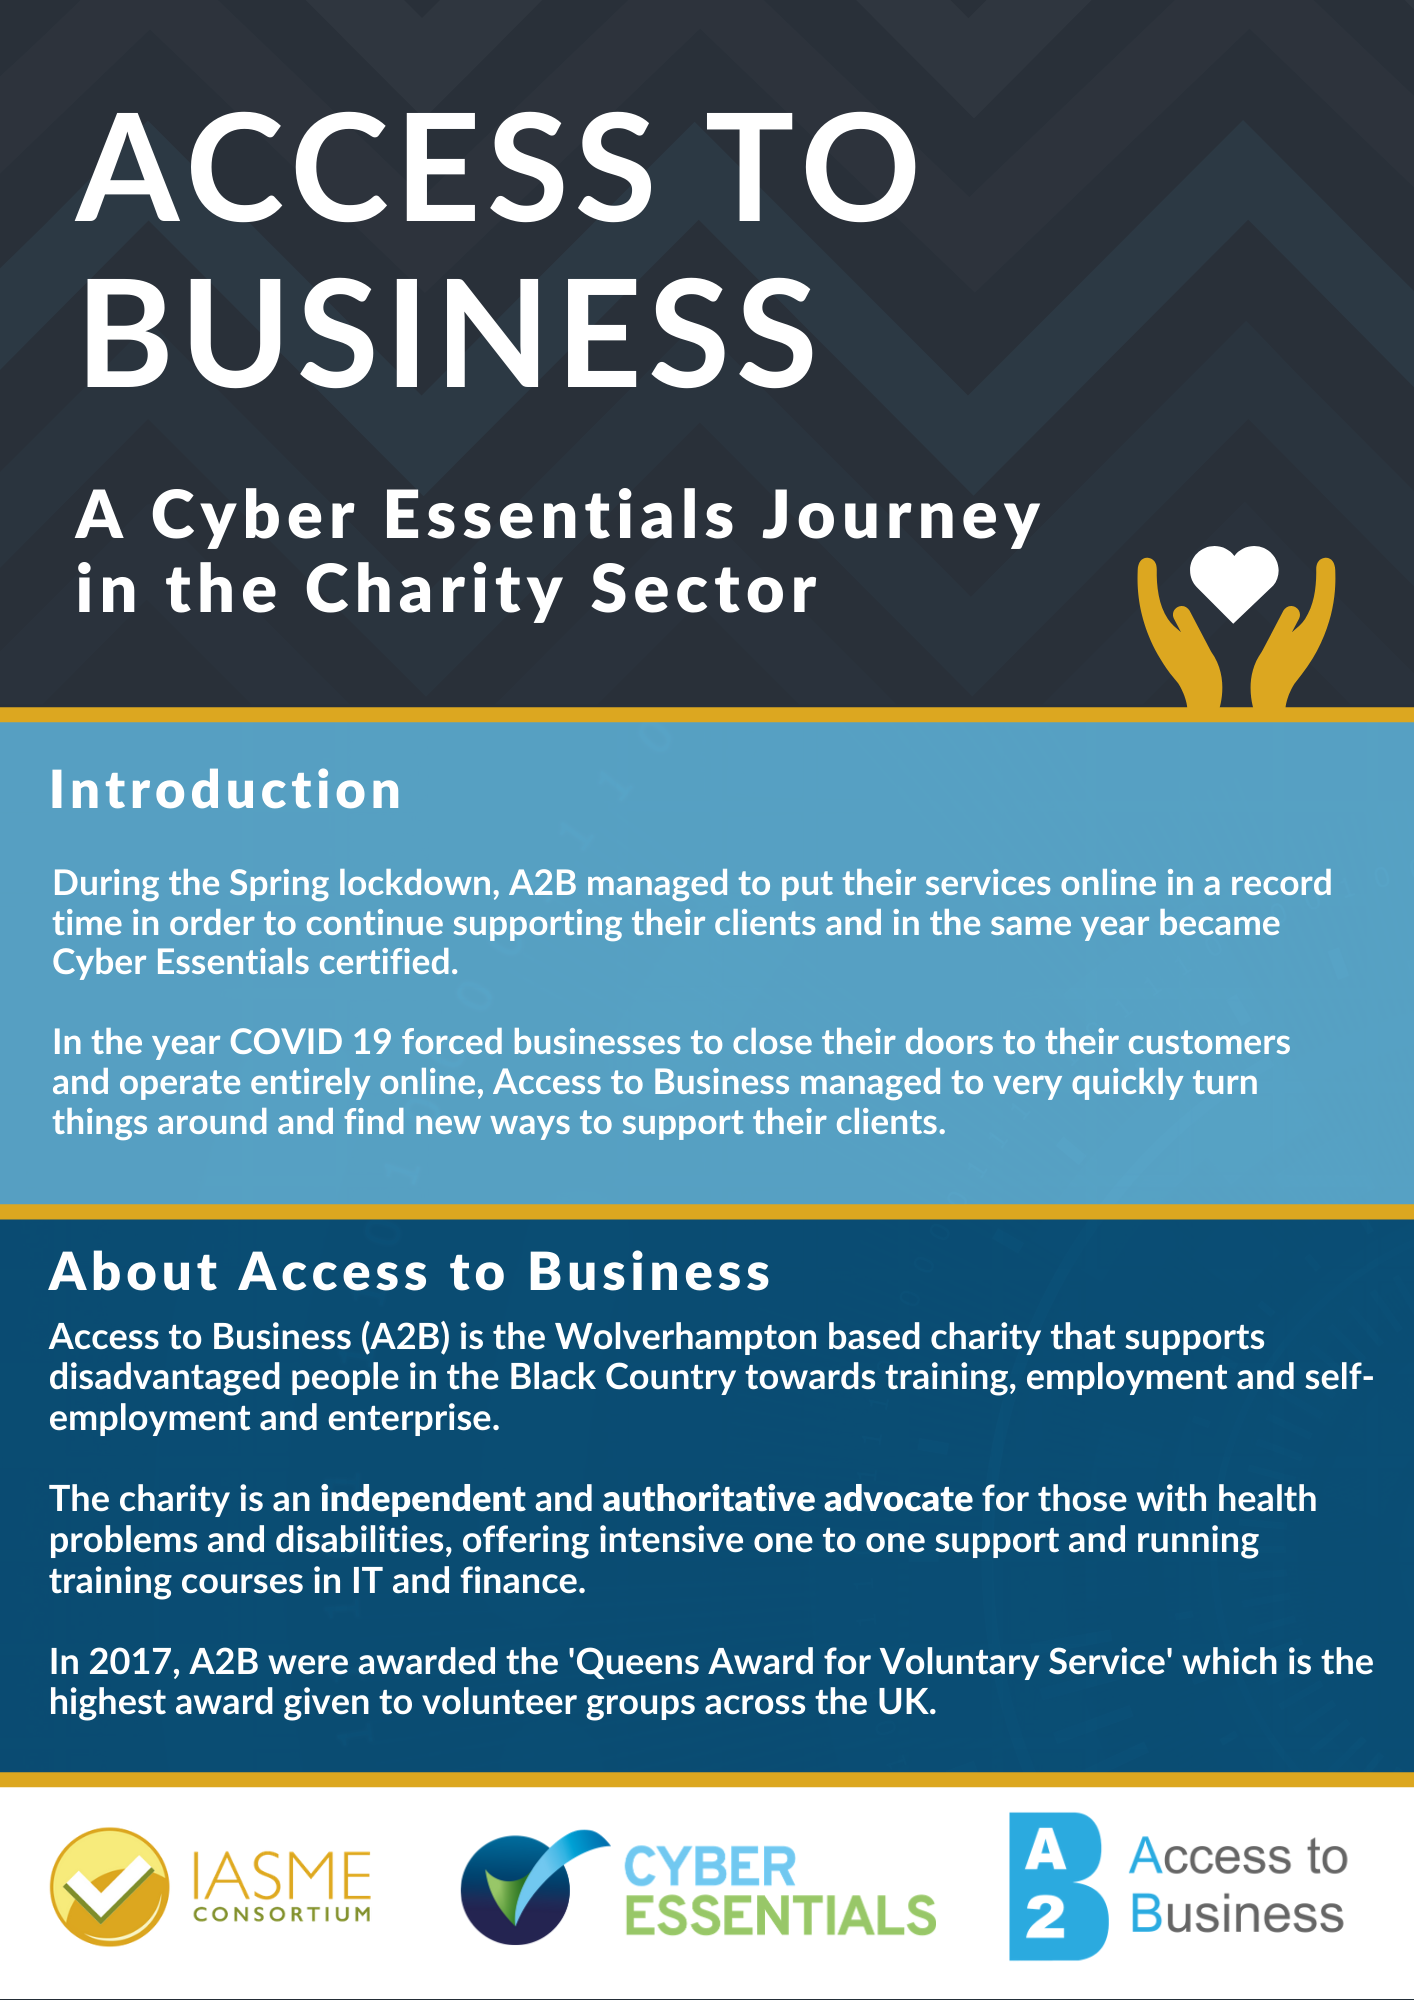 Access to Business charity Cyber Essentials case study